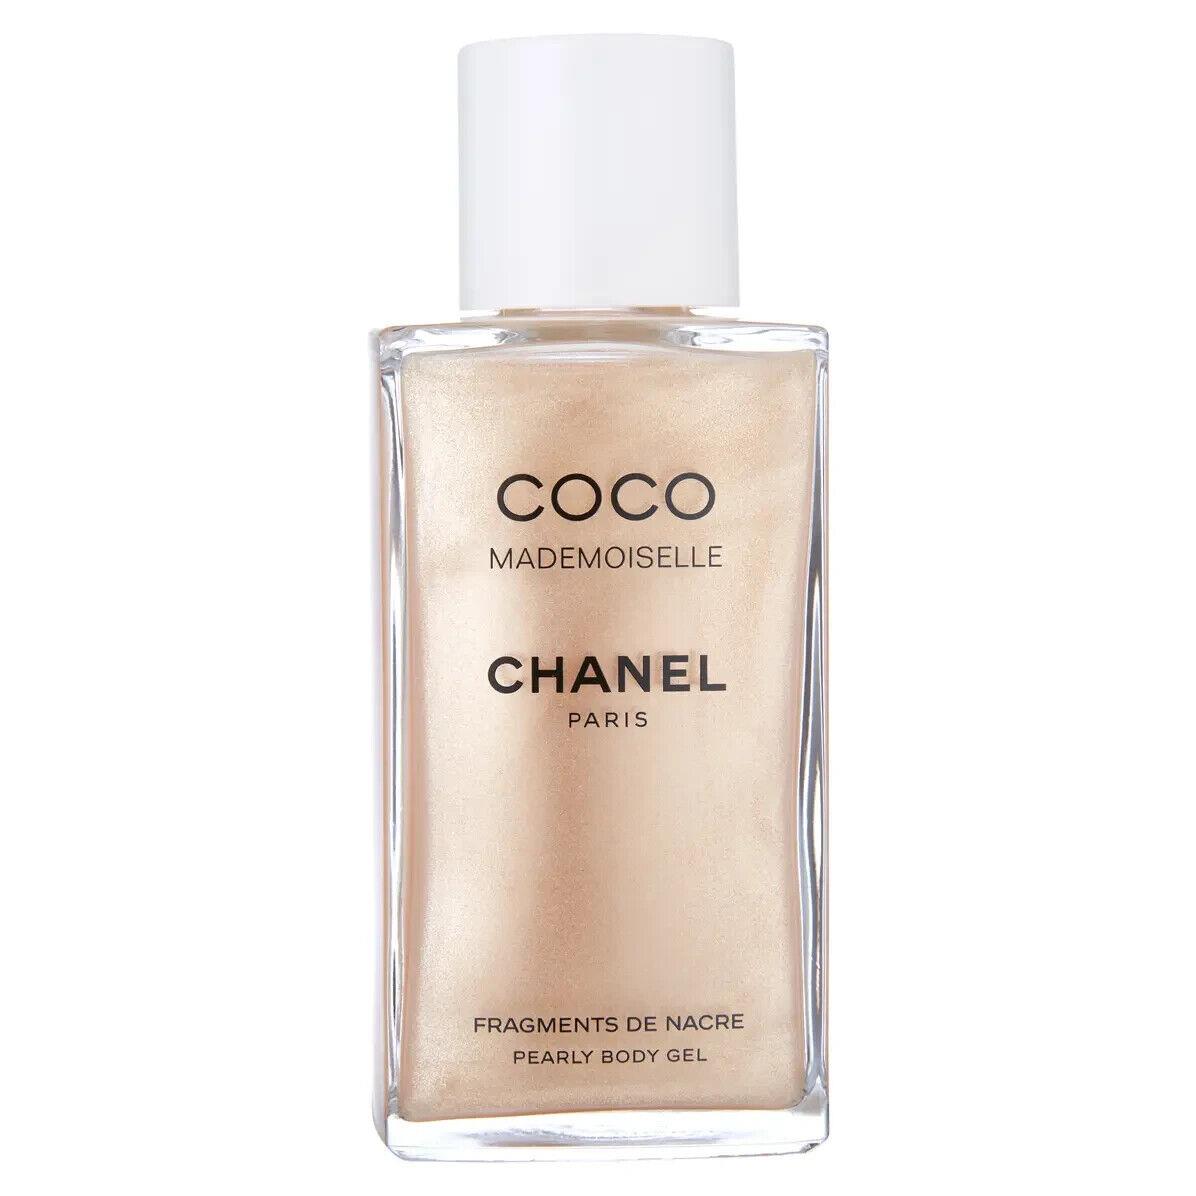 Chanel Coco Mademoiselle Pearly Body Gel Size 250ml/8.4oz. Holiday Collection